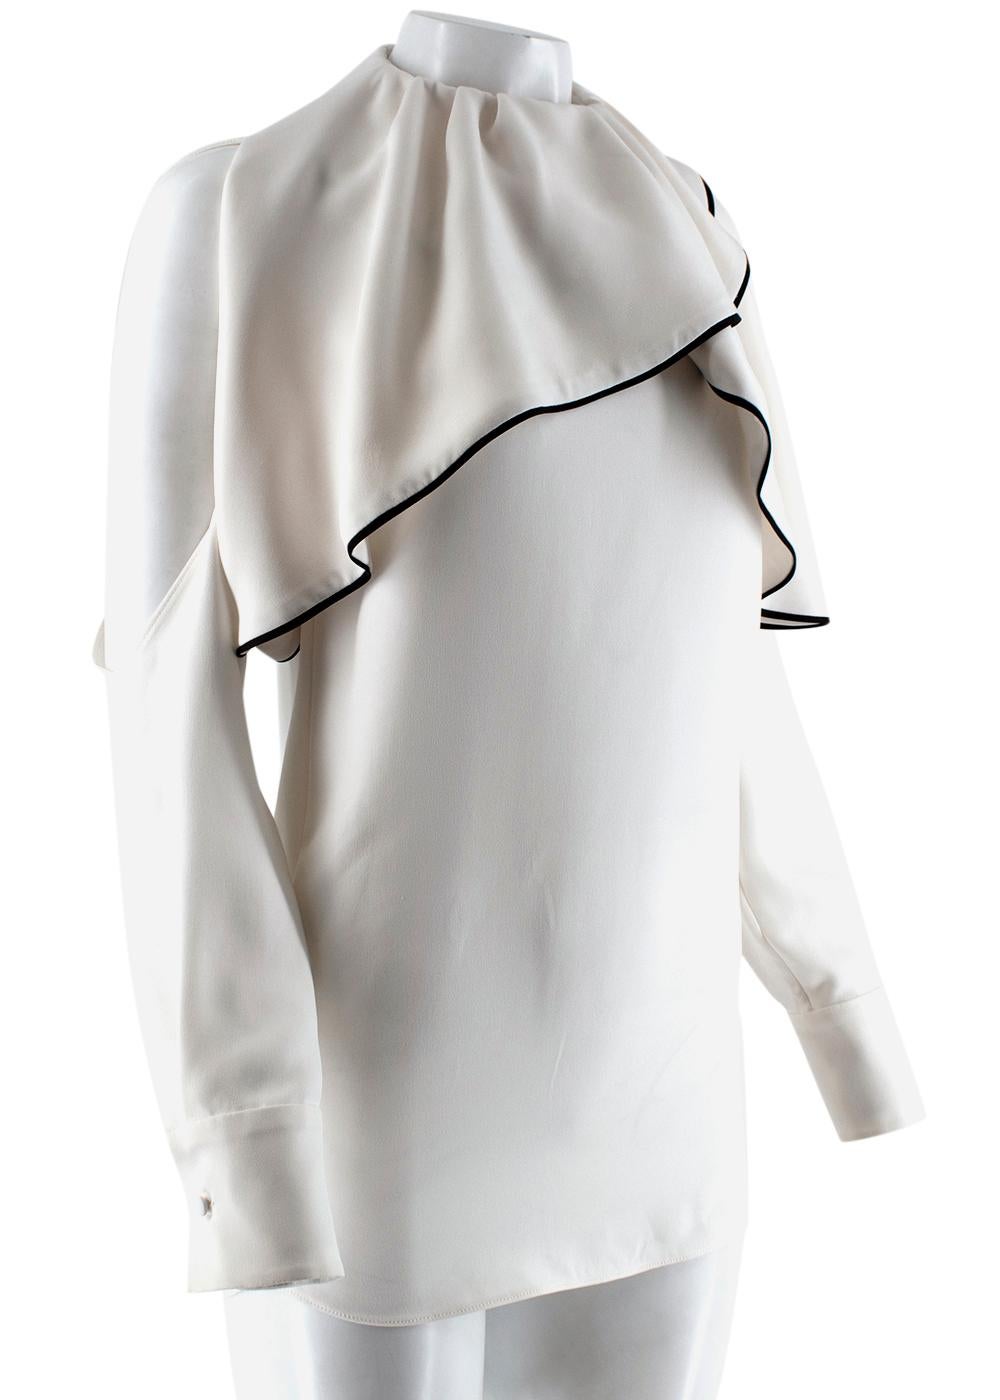 Valentino White Silk Ruffle Neck Cold Shoulder Blouse 

- White silk blouse 
- Black piped trim detailing 
- Ruffled front design
- Cut-away shoulders
- Long sleeves 
- Buttoned cuffs 
- Loose fit 
- Press-stud and button fastening at neck